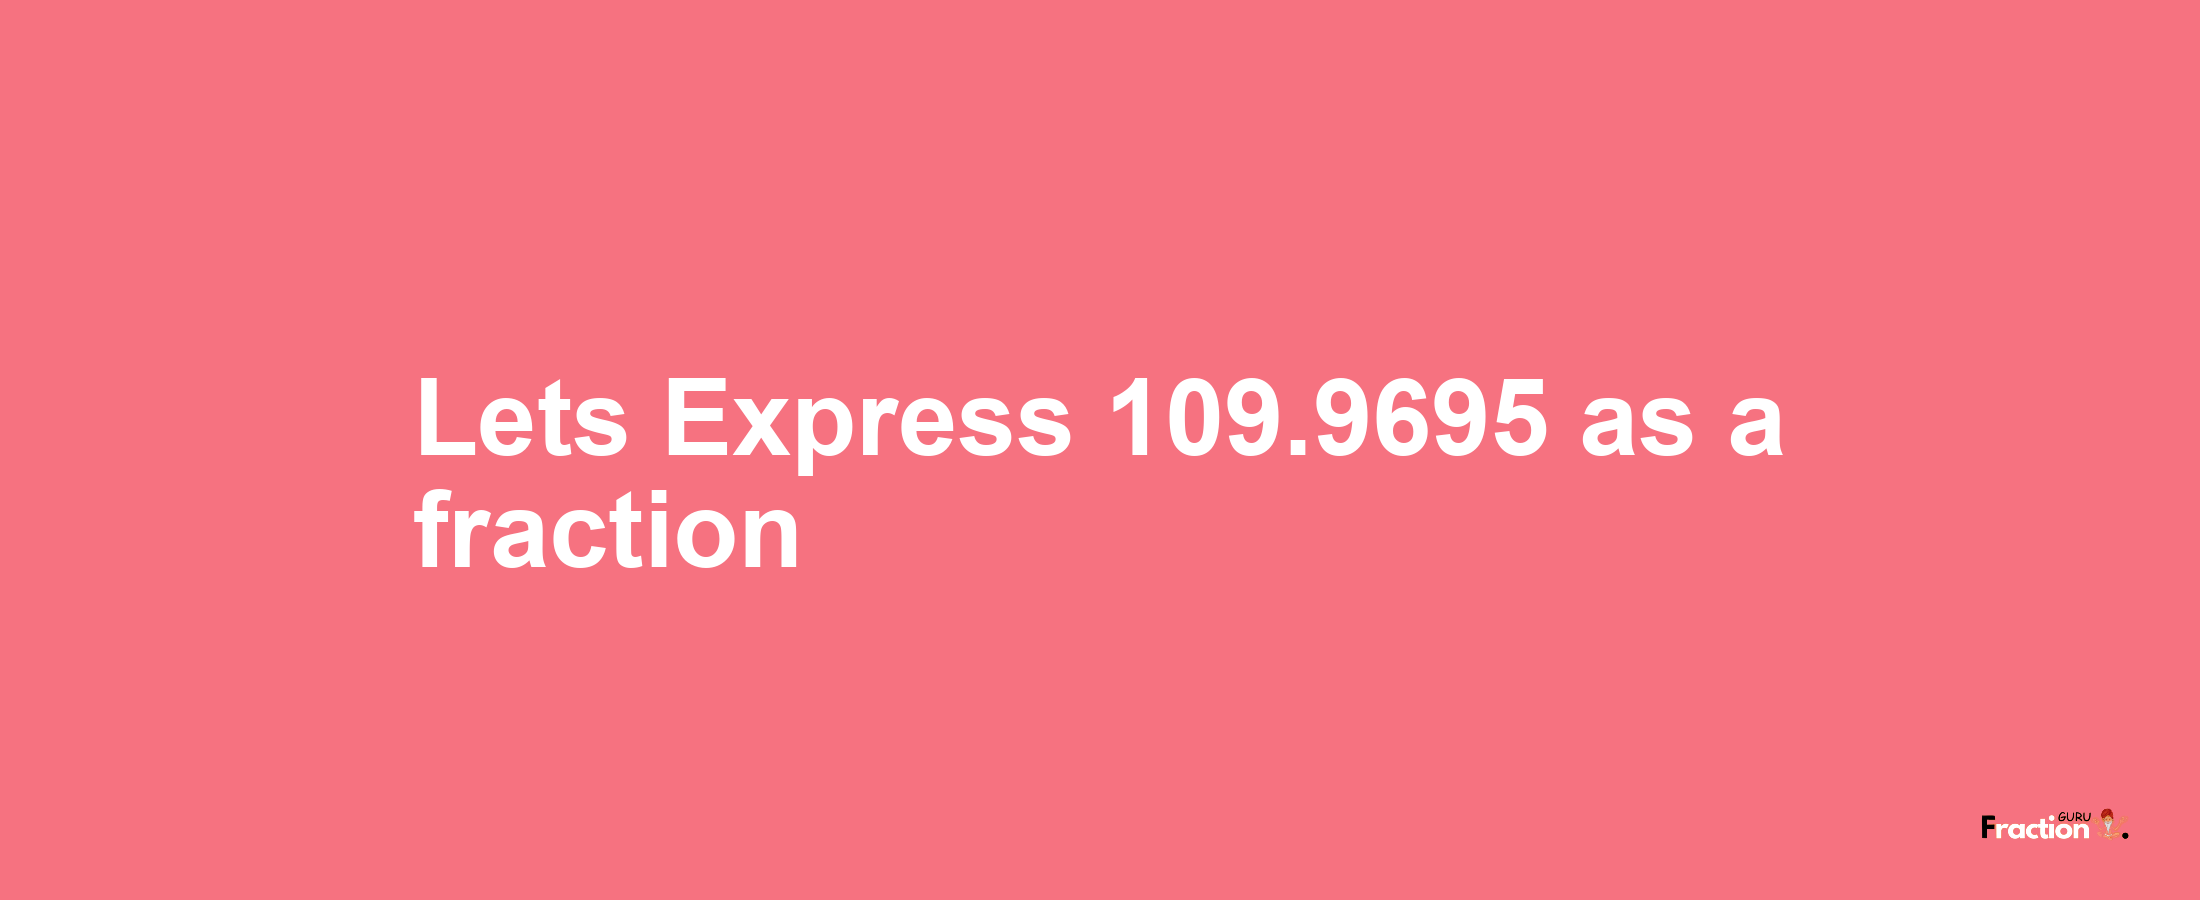 Lets Express 109.9695 as afraction